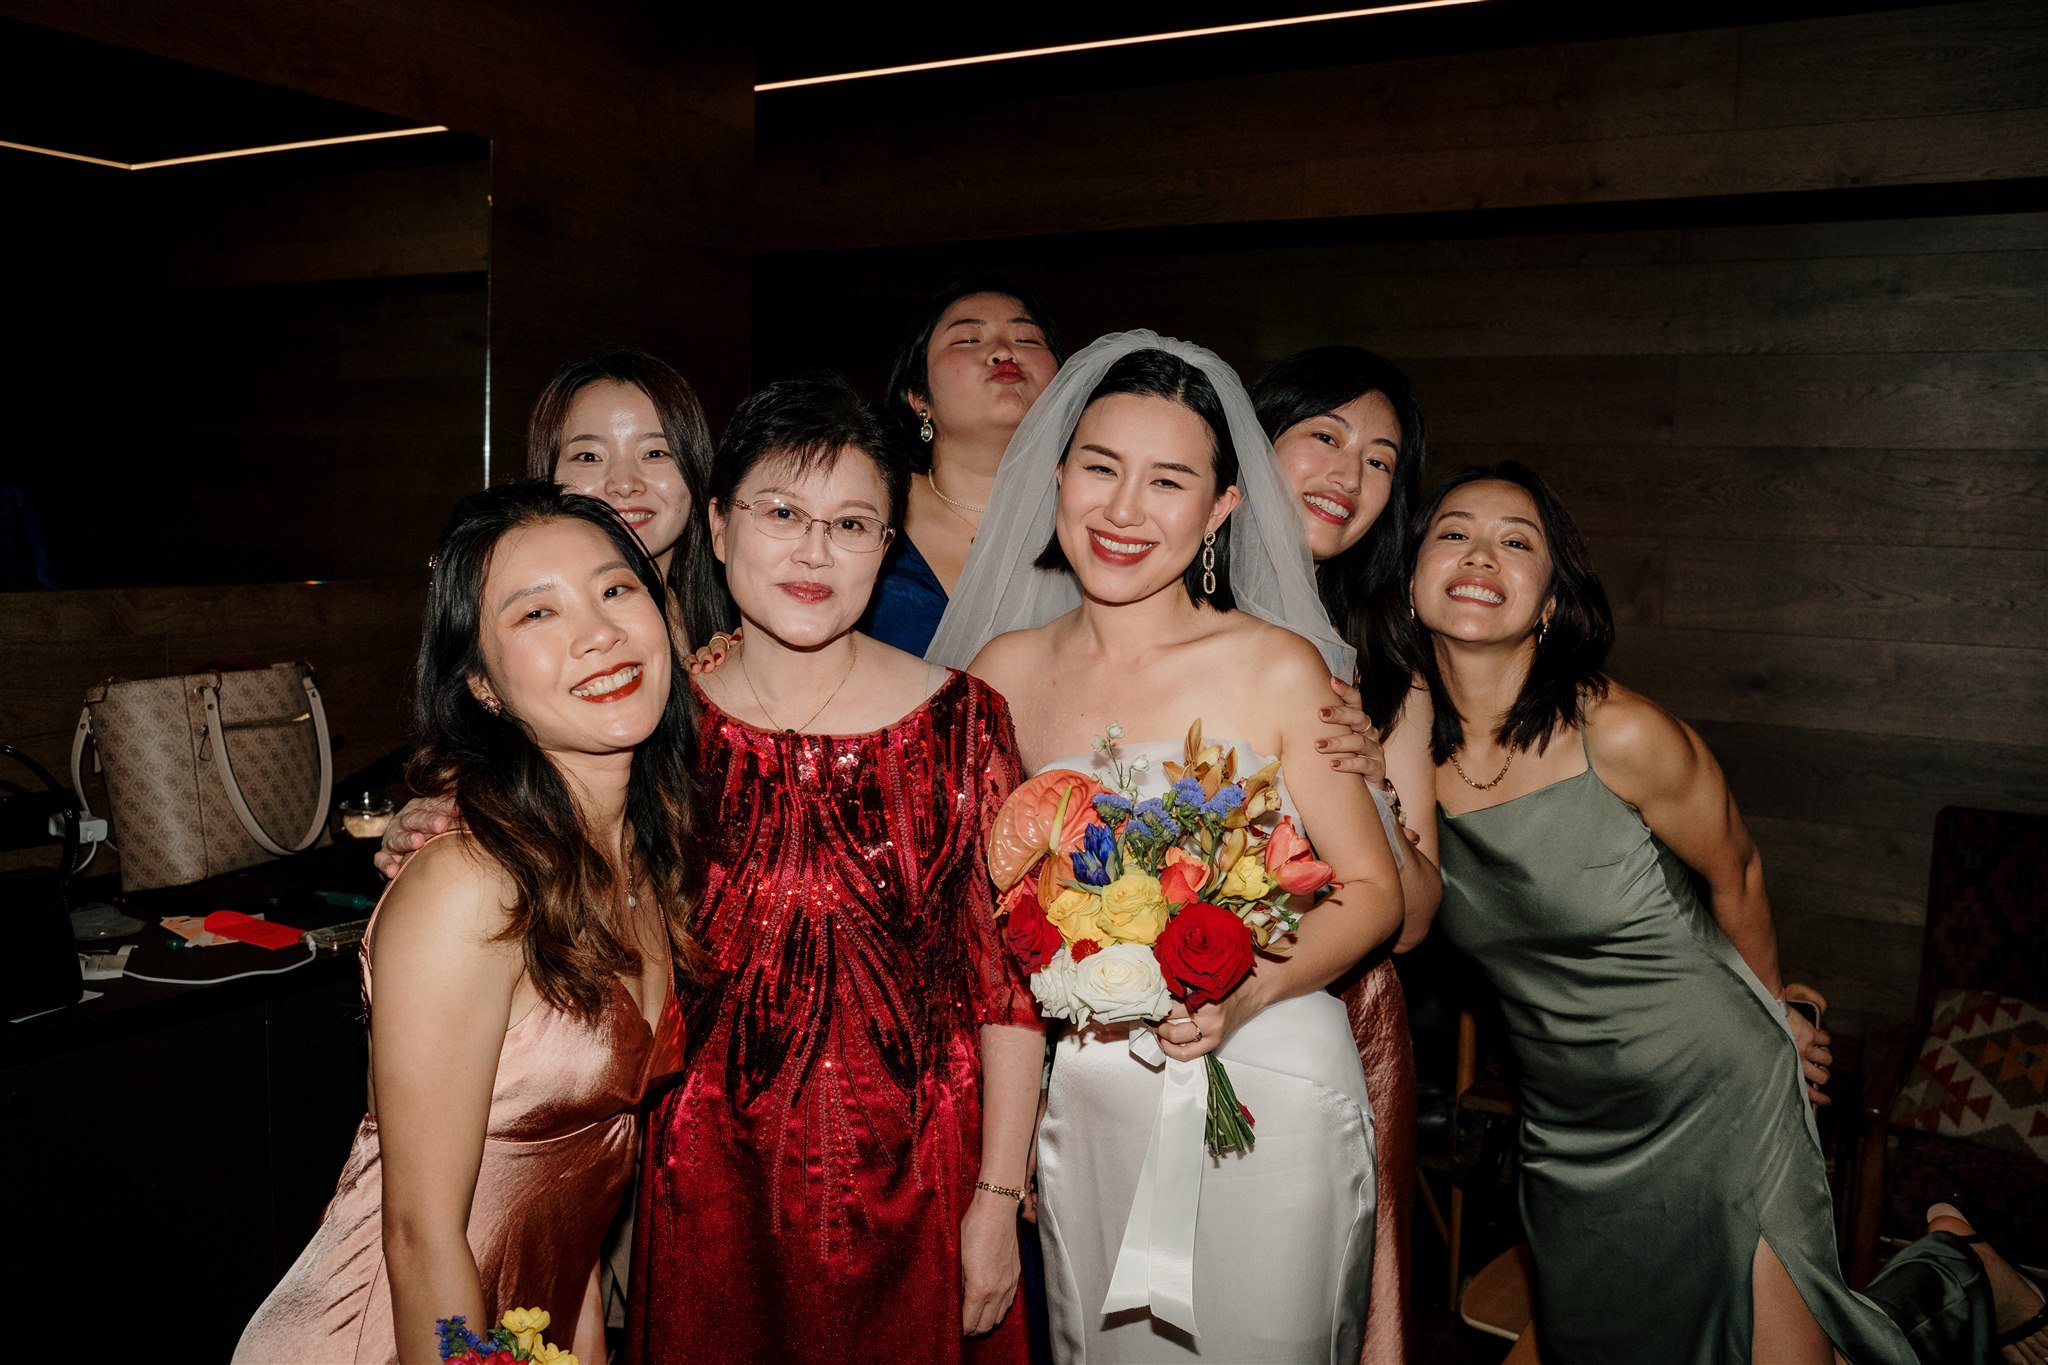 glasshouse-morningside-urban-best-auckland-wedding-venue-central-indoor-photographer-videographer-dear-white-productions-top-industrial-chinese-ceremony-tradition (59).jpg